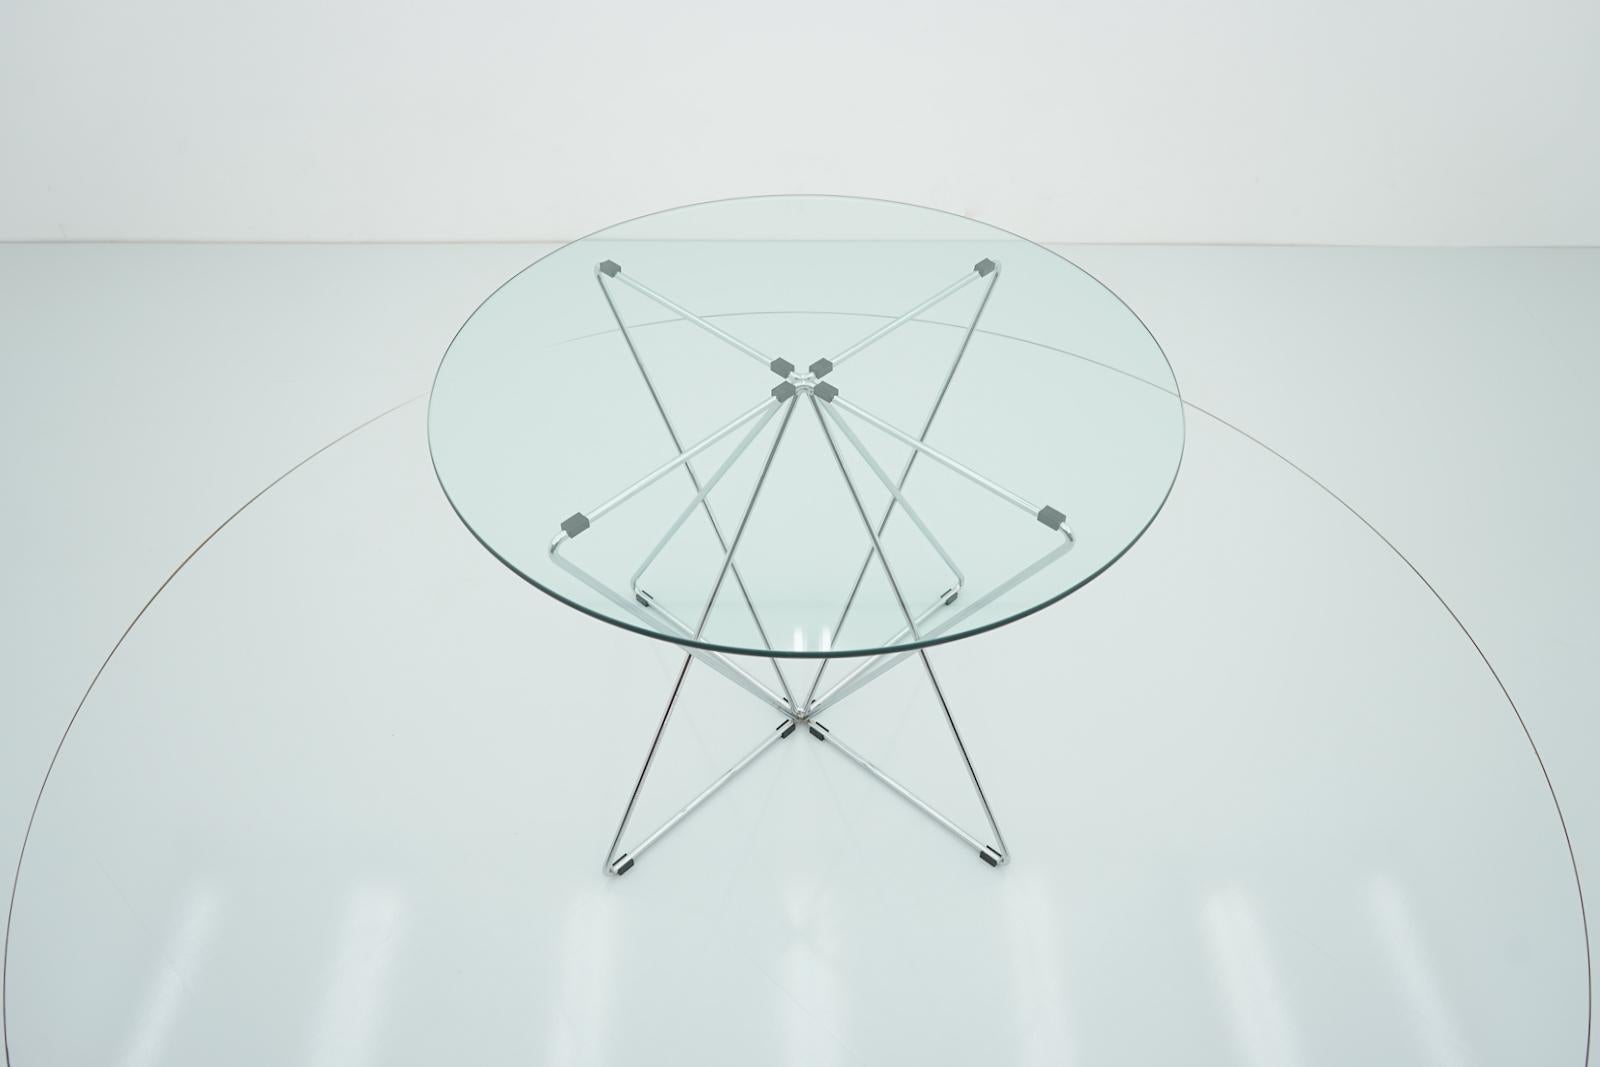 Rare glass and chromed steel dining table by Till Behrens, Schlubach Germany 1983.
The base is signed.
Very good condition.
     